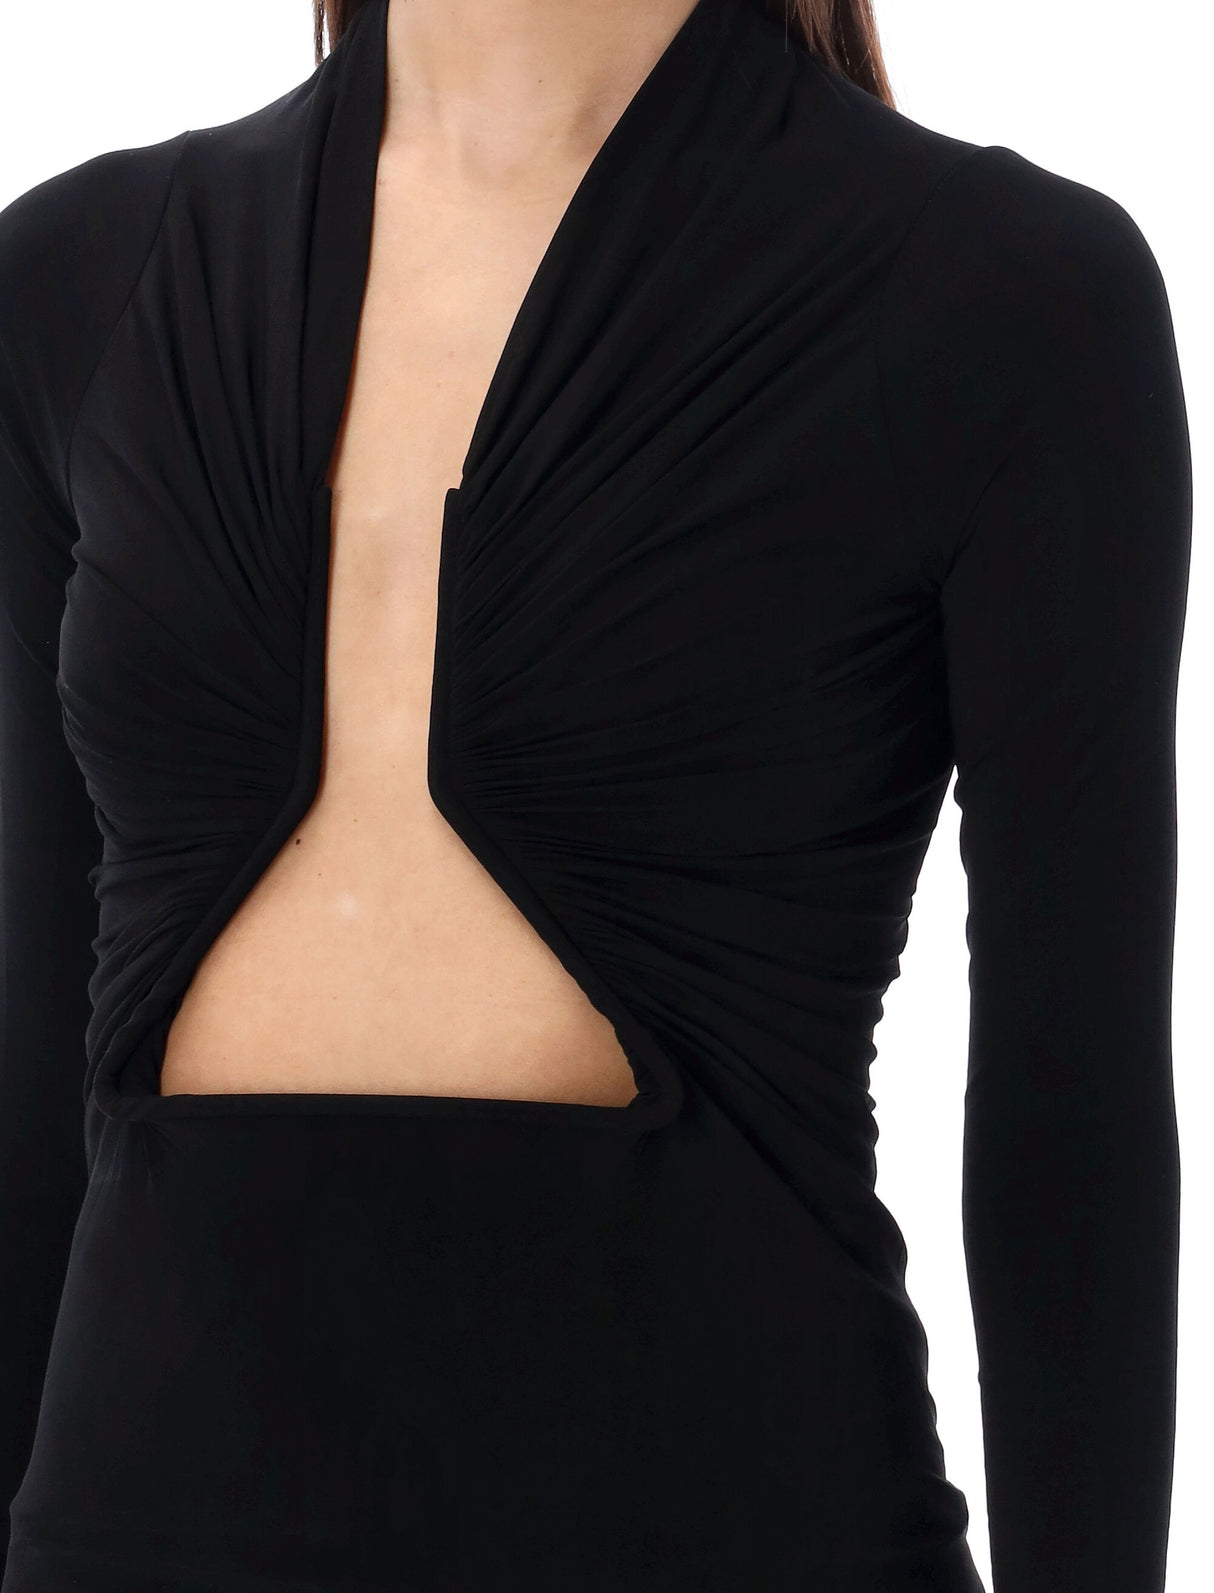 RICK OWENS Geometric Cut-Out Black Long Sleeve Top - SS24 Collection